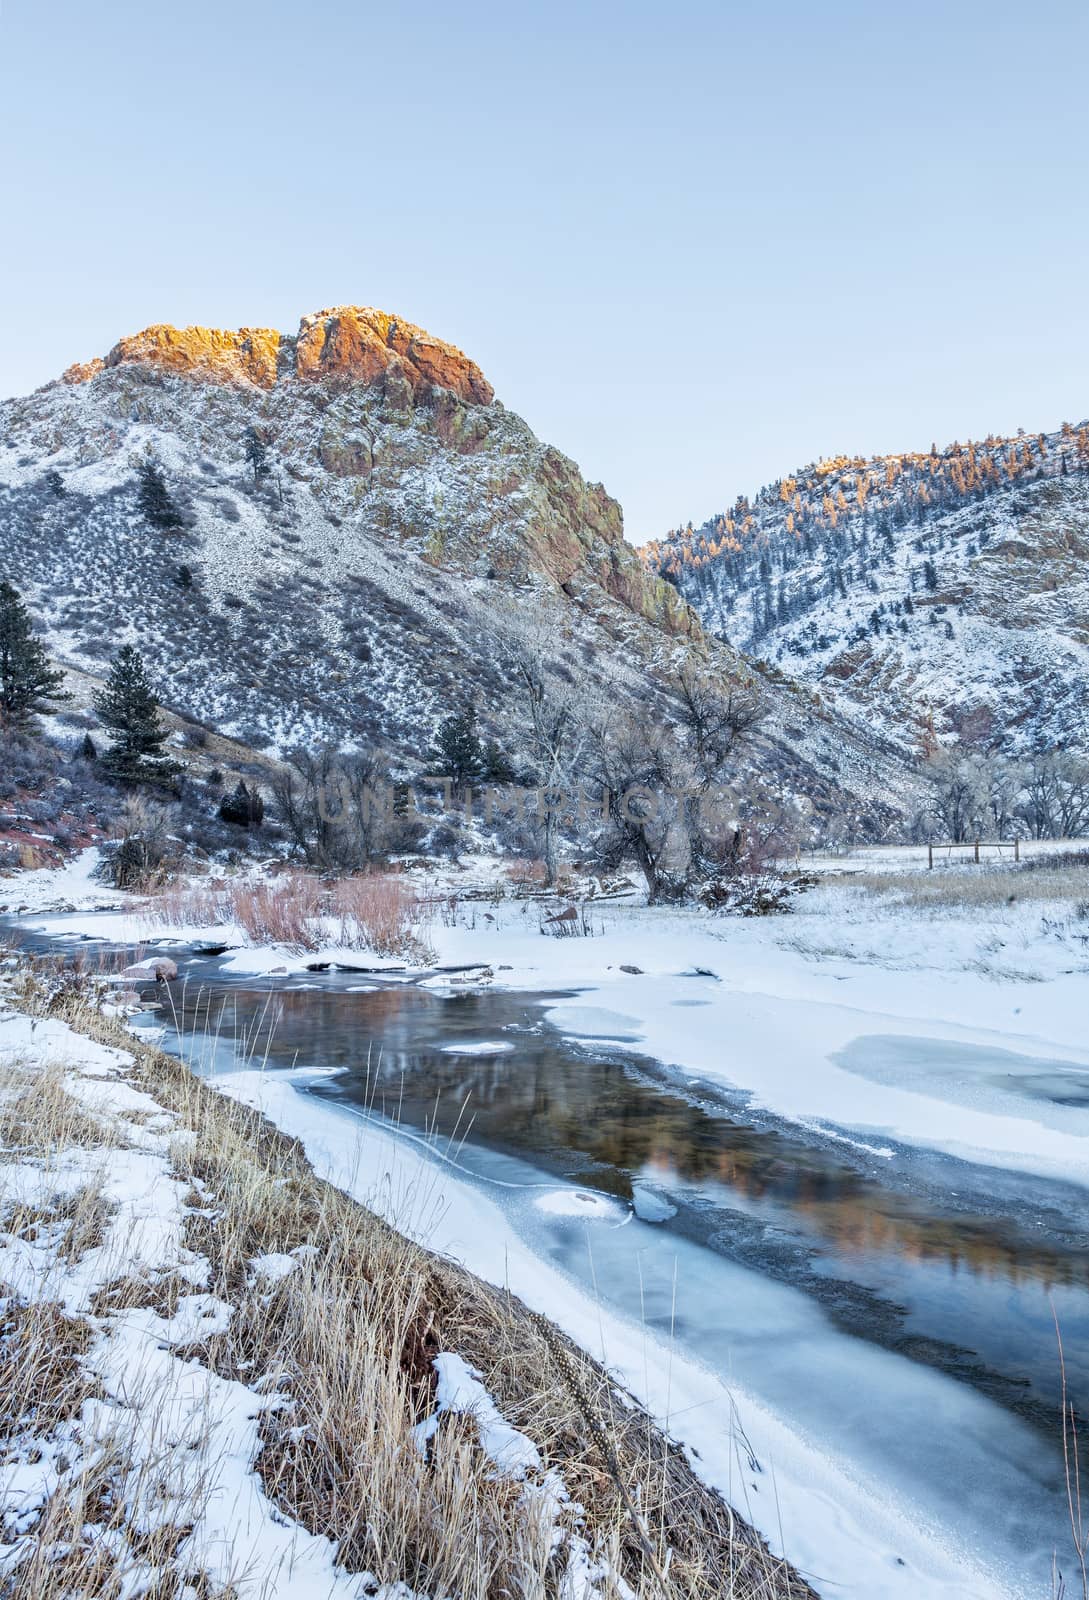 winter sunset over Cache la Poudre River (North Fork) at Eagle Nest Open Space in northern Colorado near Fort Collins